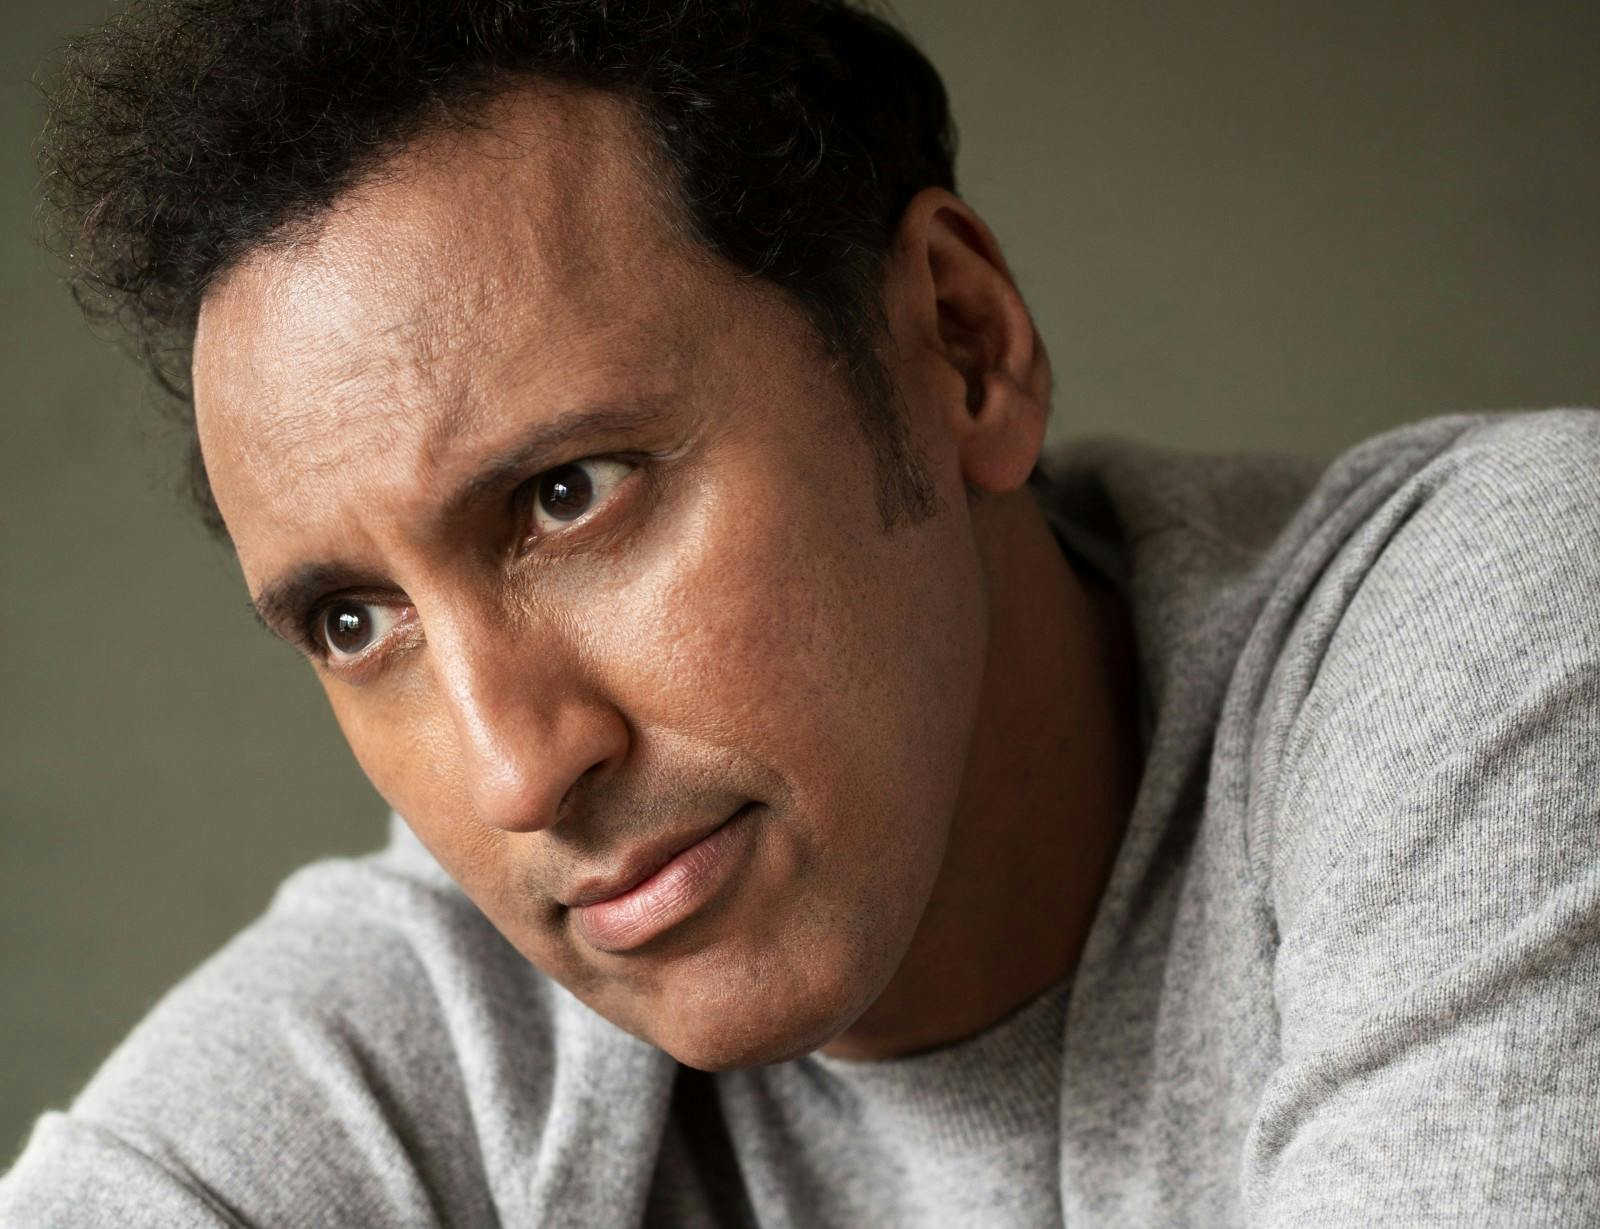 Aasif by Gregg Delman